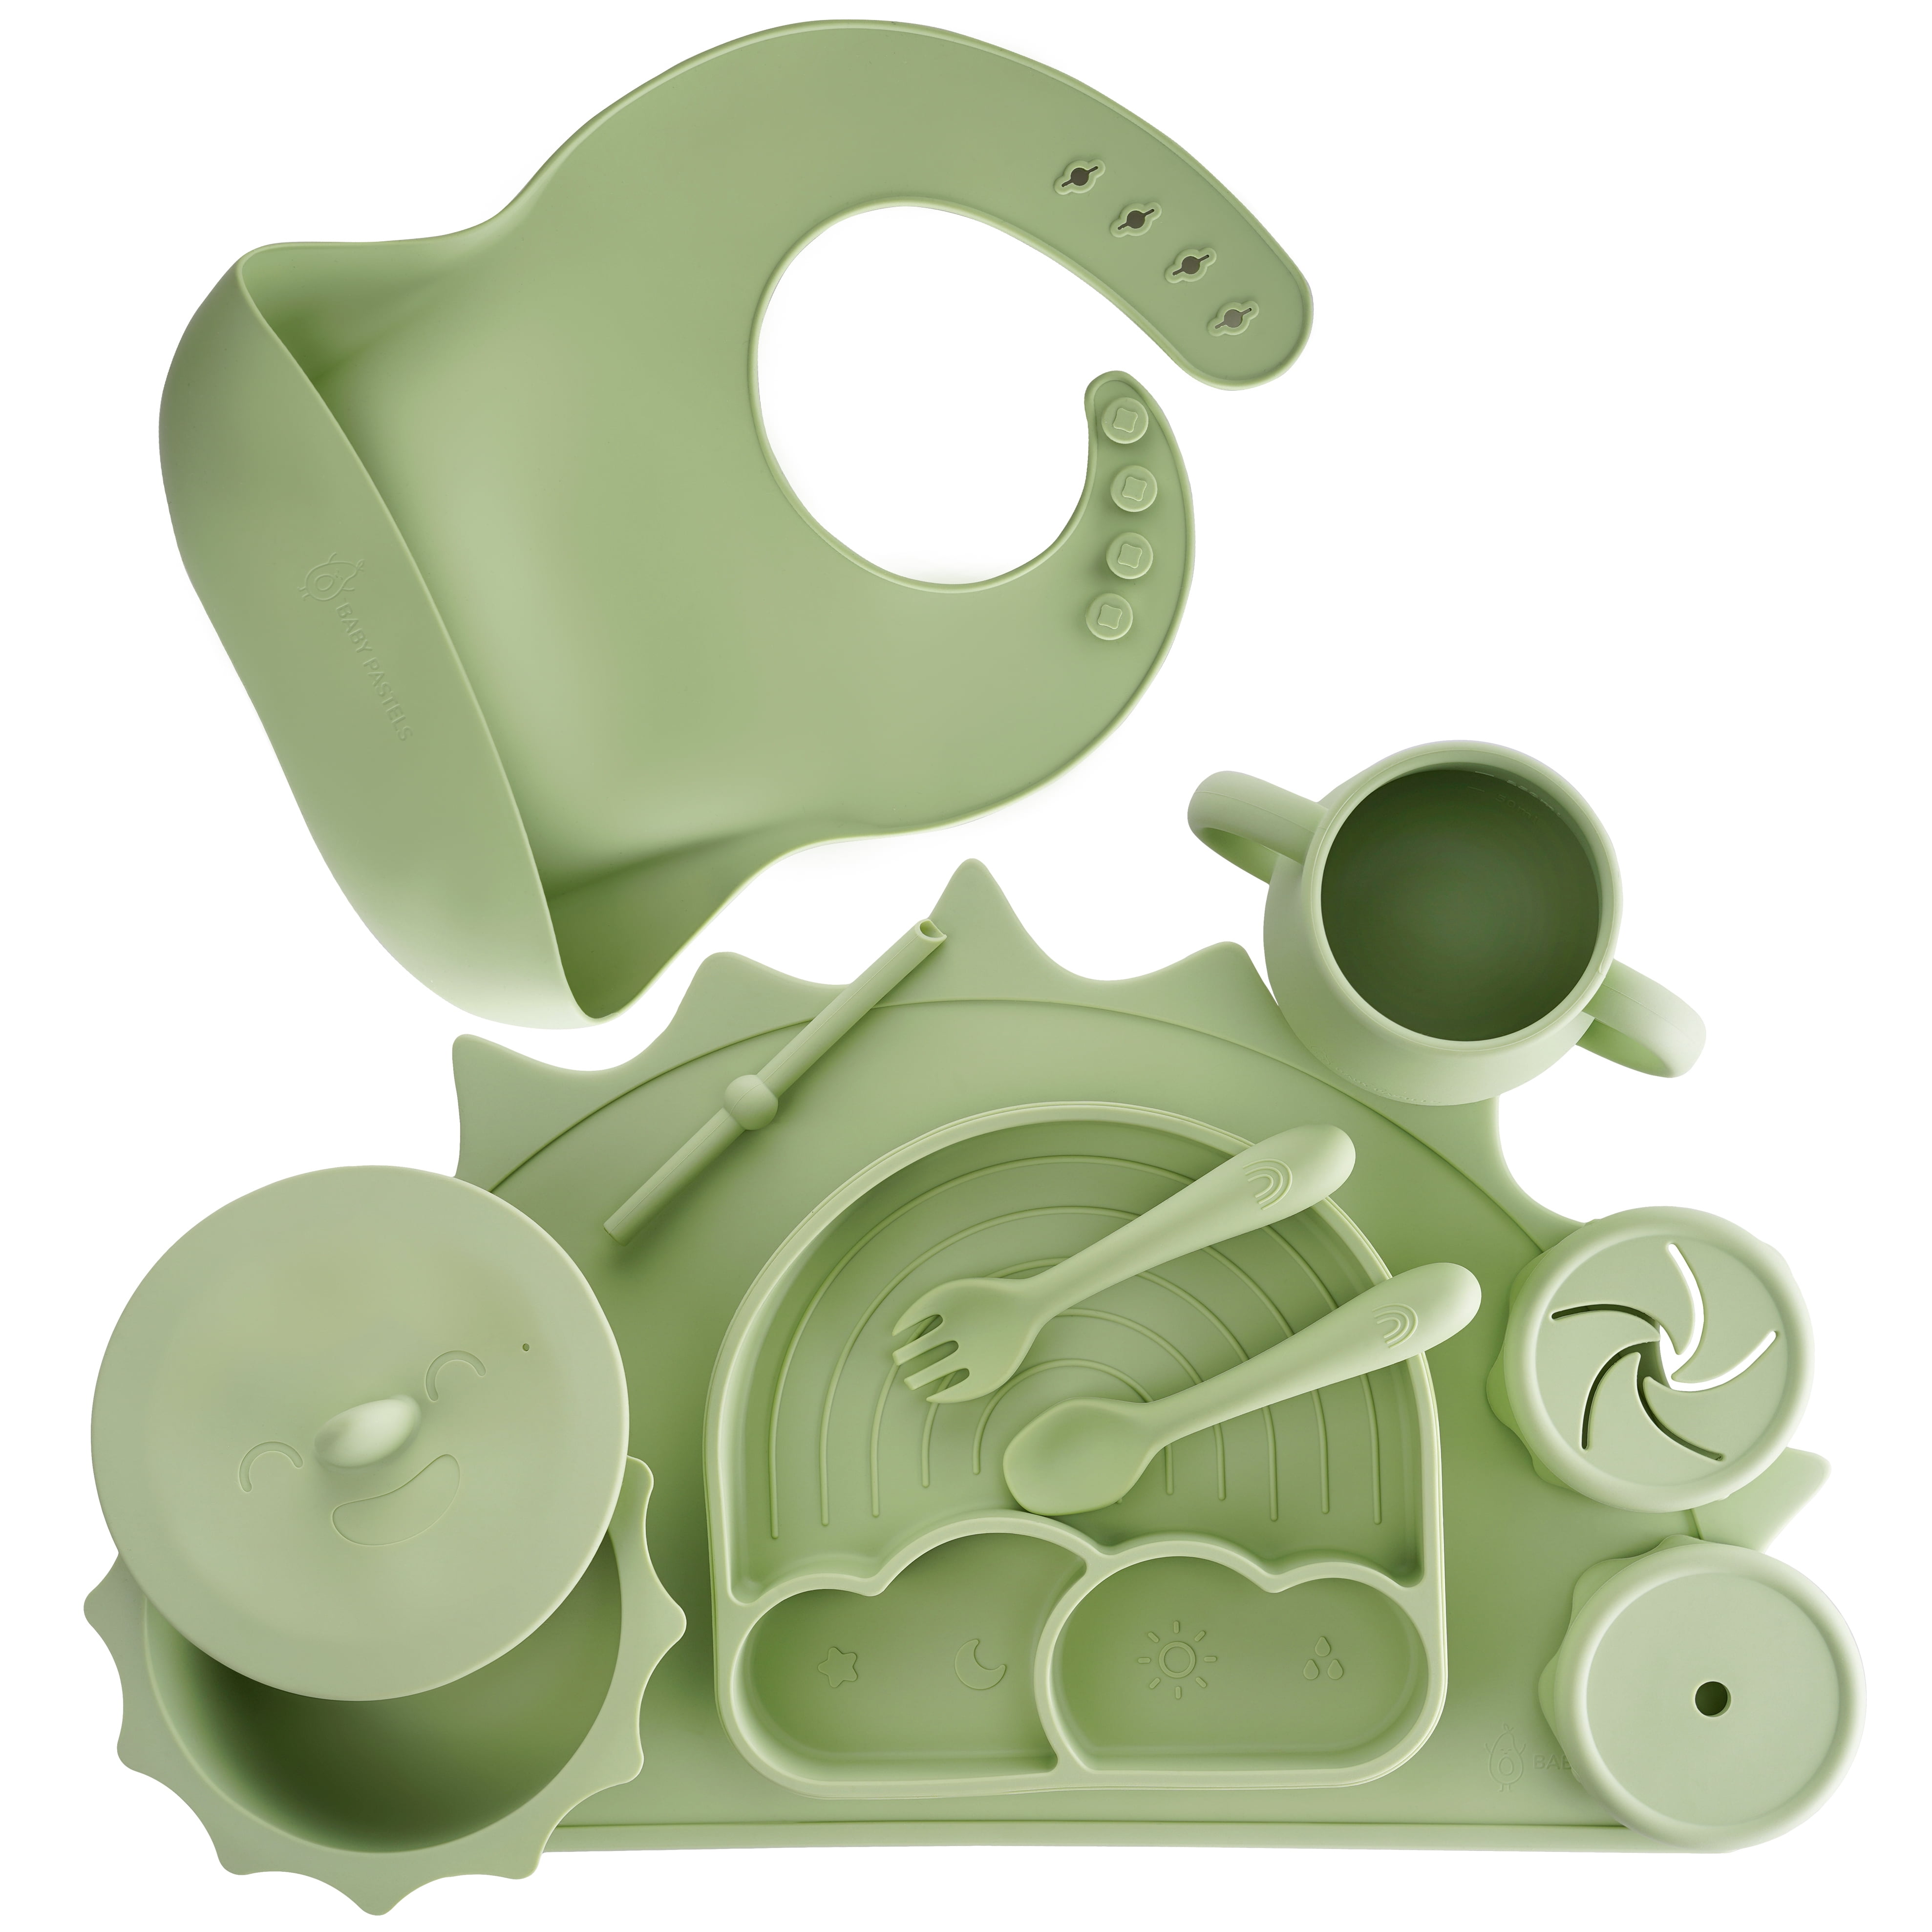 Baby Pastels - Baby Feeding Set - Baby Led Weaning Supplies